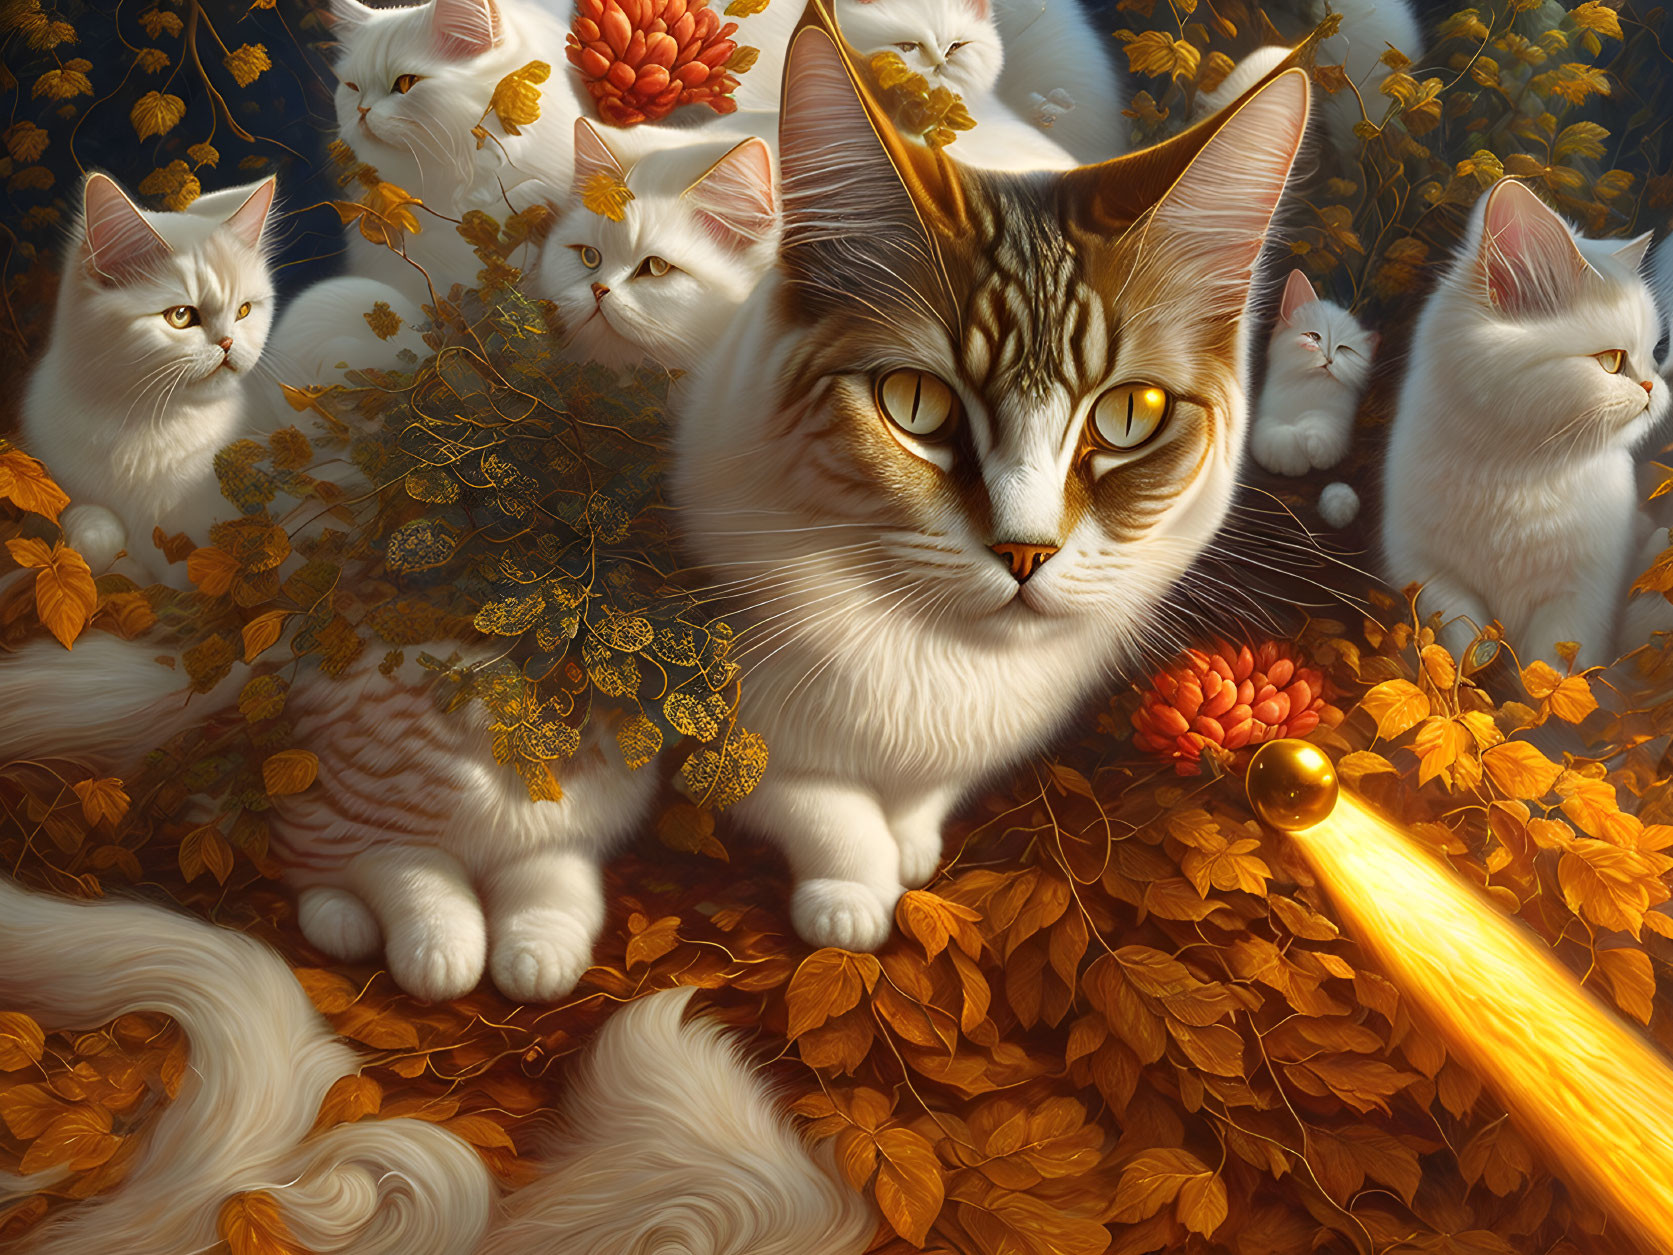 Illustration of White and Brown Cats in Autumn Setting